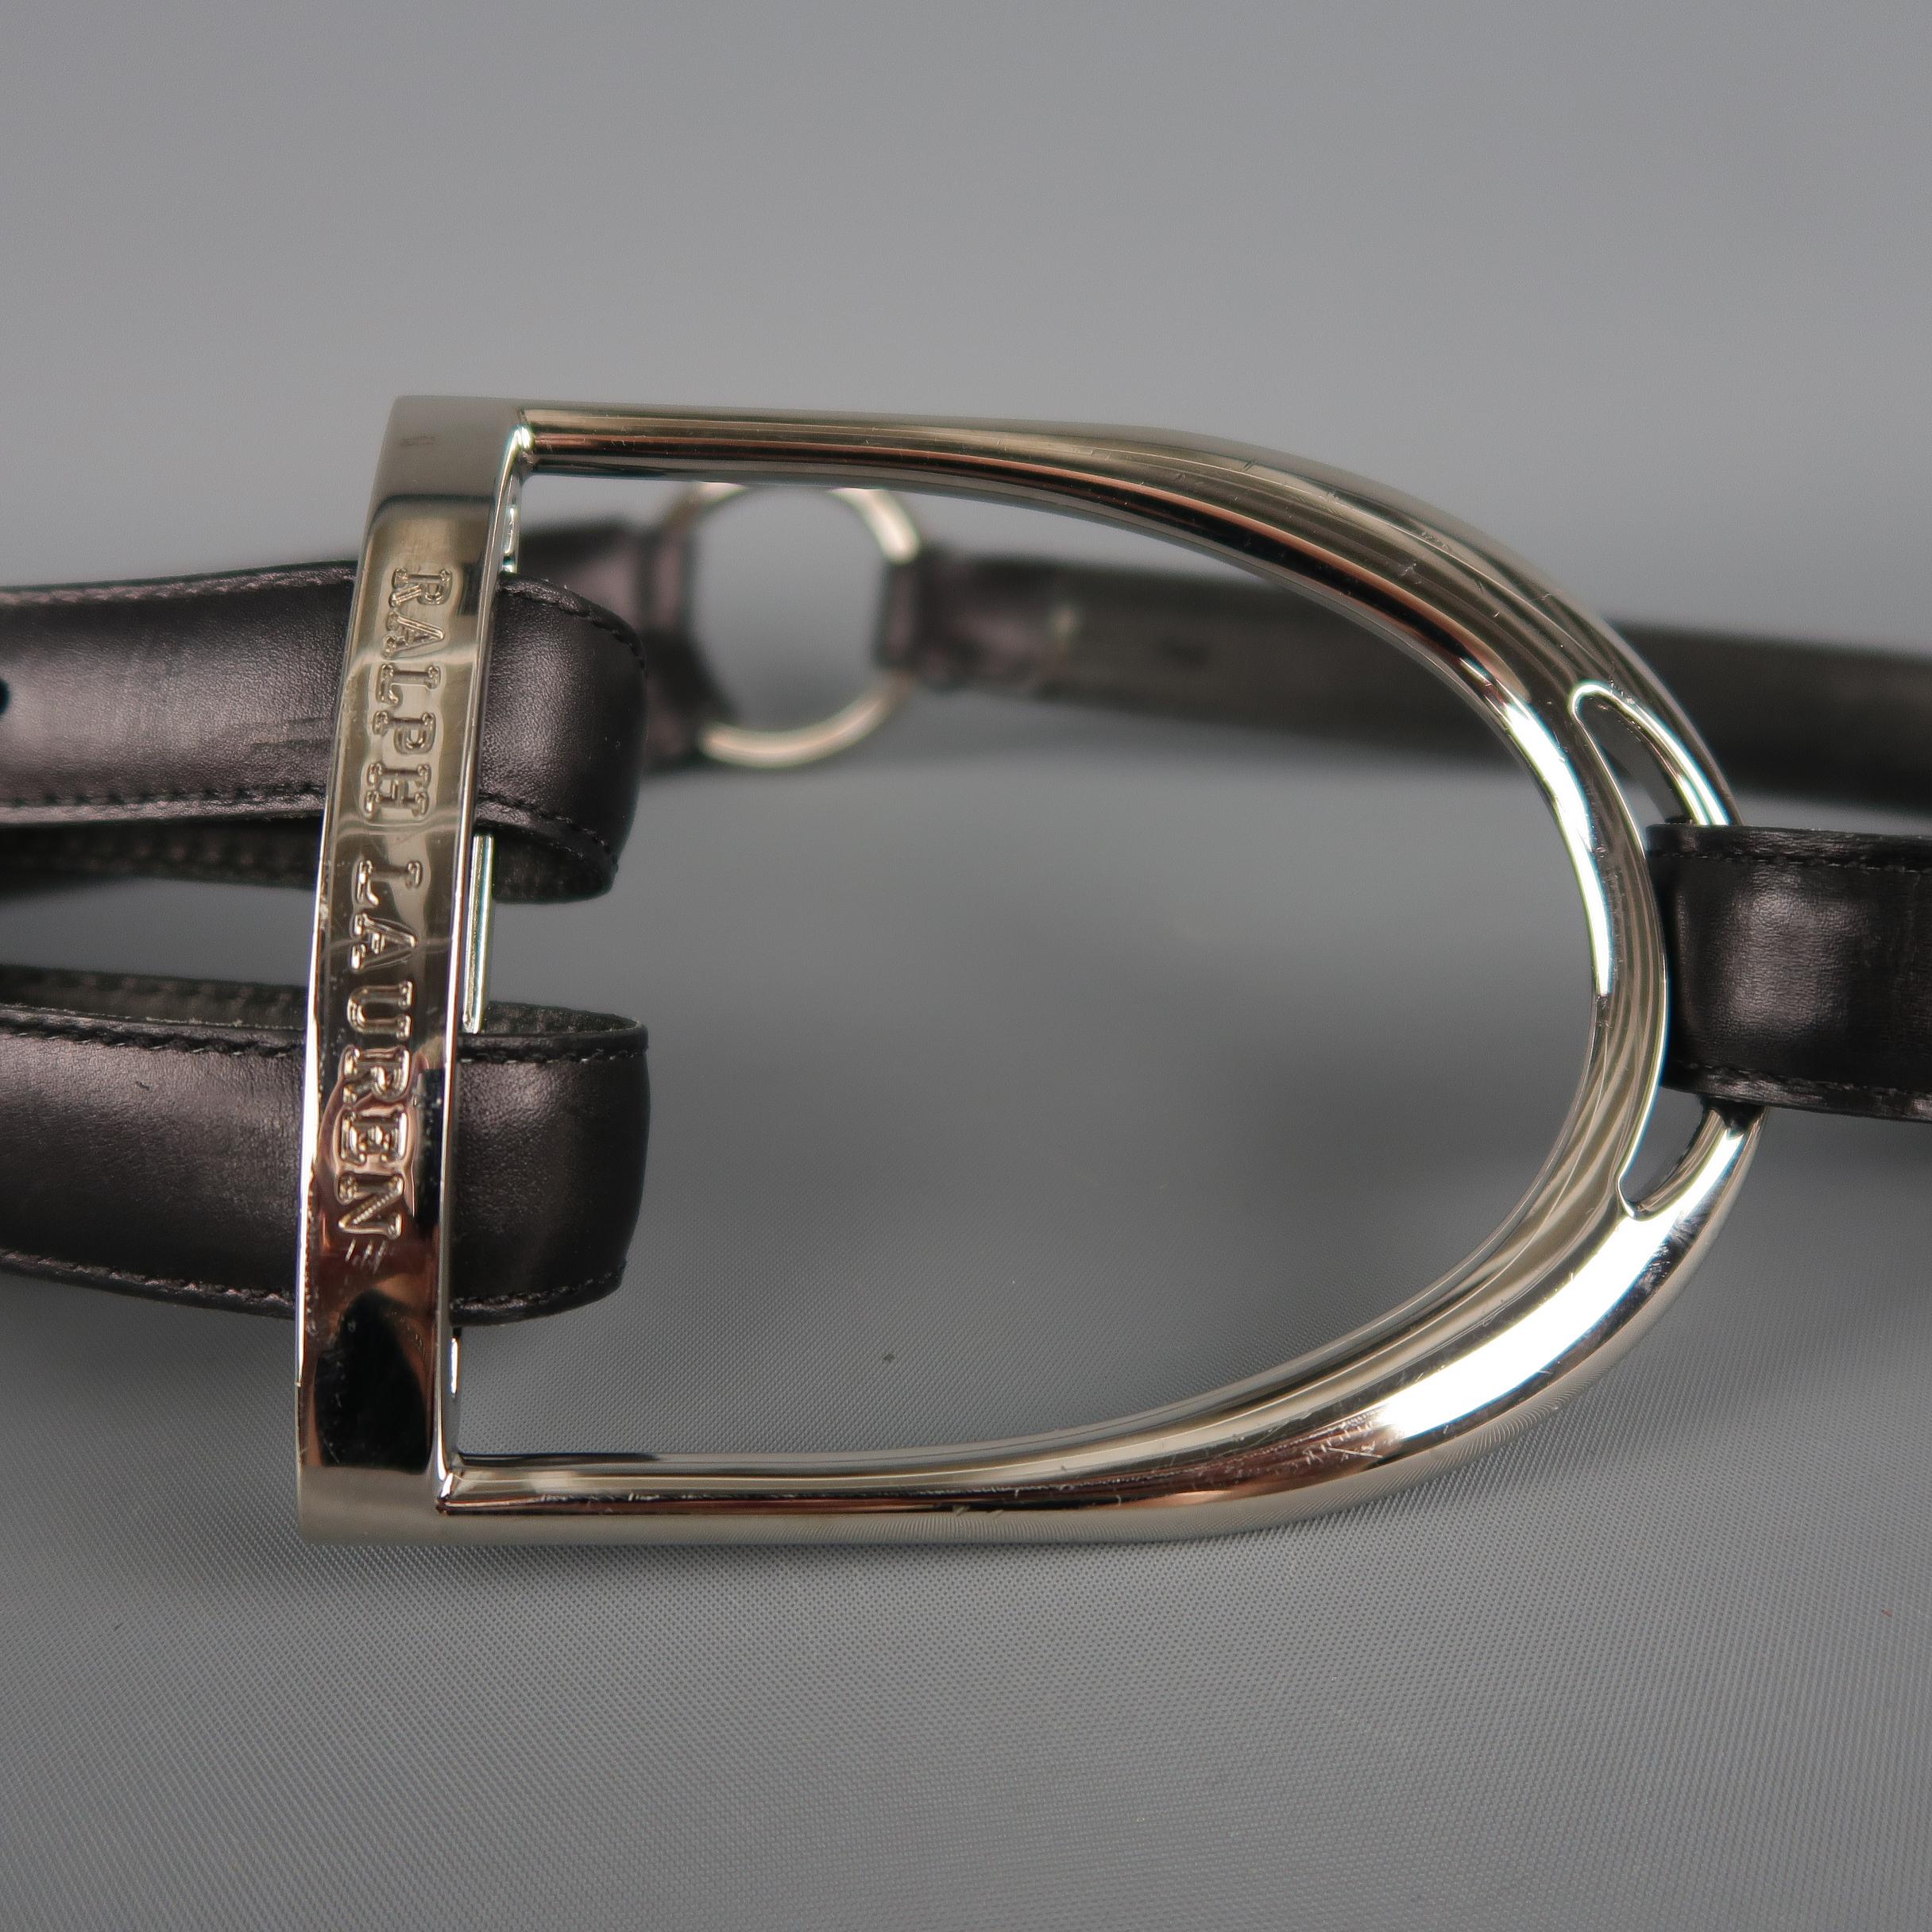 RALPH LAUREN statement belt features an oversized embossed silver tone Equestrian D ring with a double black leather strap, silver tone hoop, and single strap side. Made in England.  Retail: $695.00
 
Very Good Pre-Owned Condition.
Marked: S
